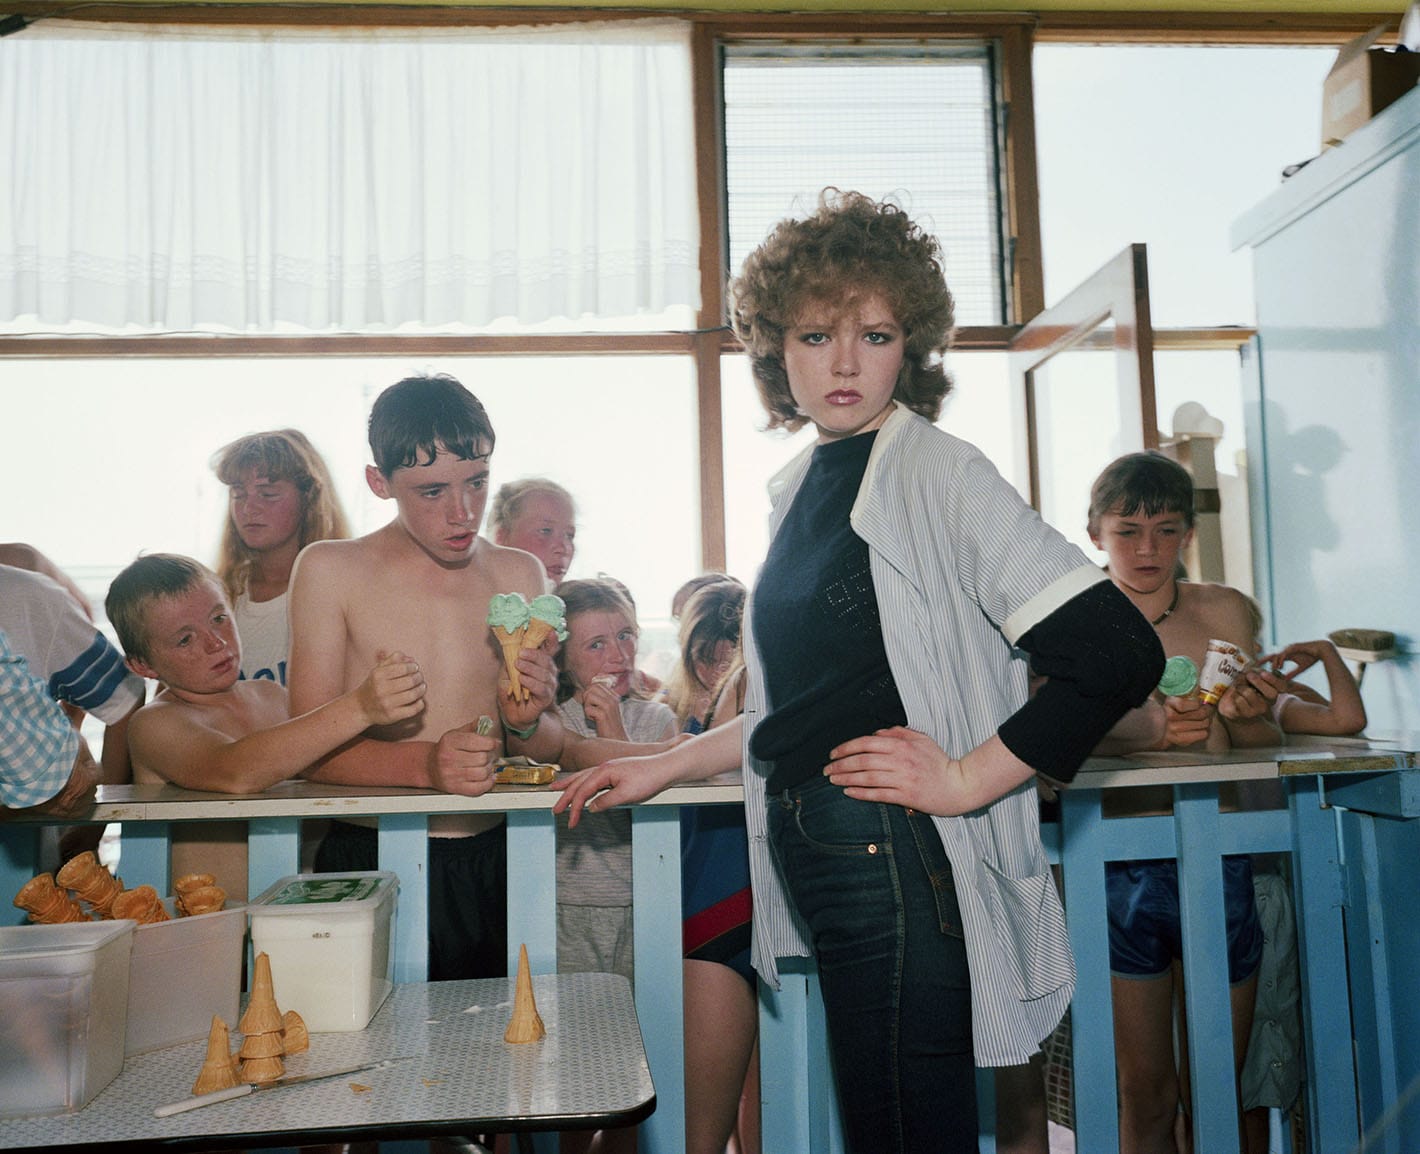 Martin Parr participates in group exhibition “New Brighton Revisited” at The Sailing School in UK